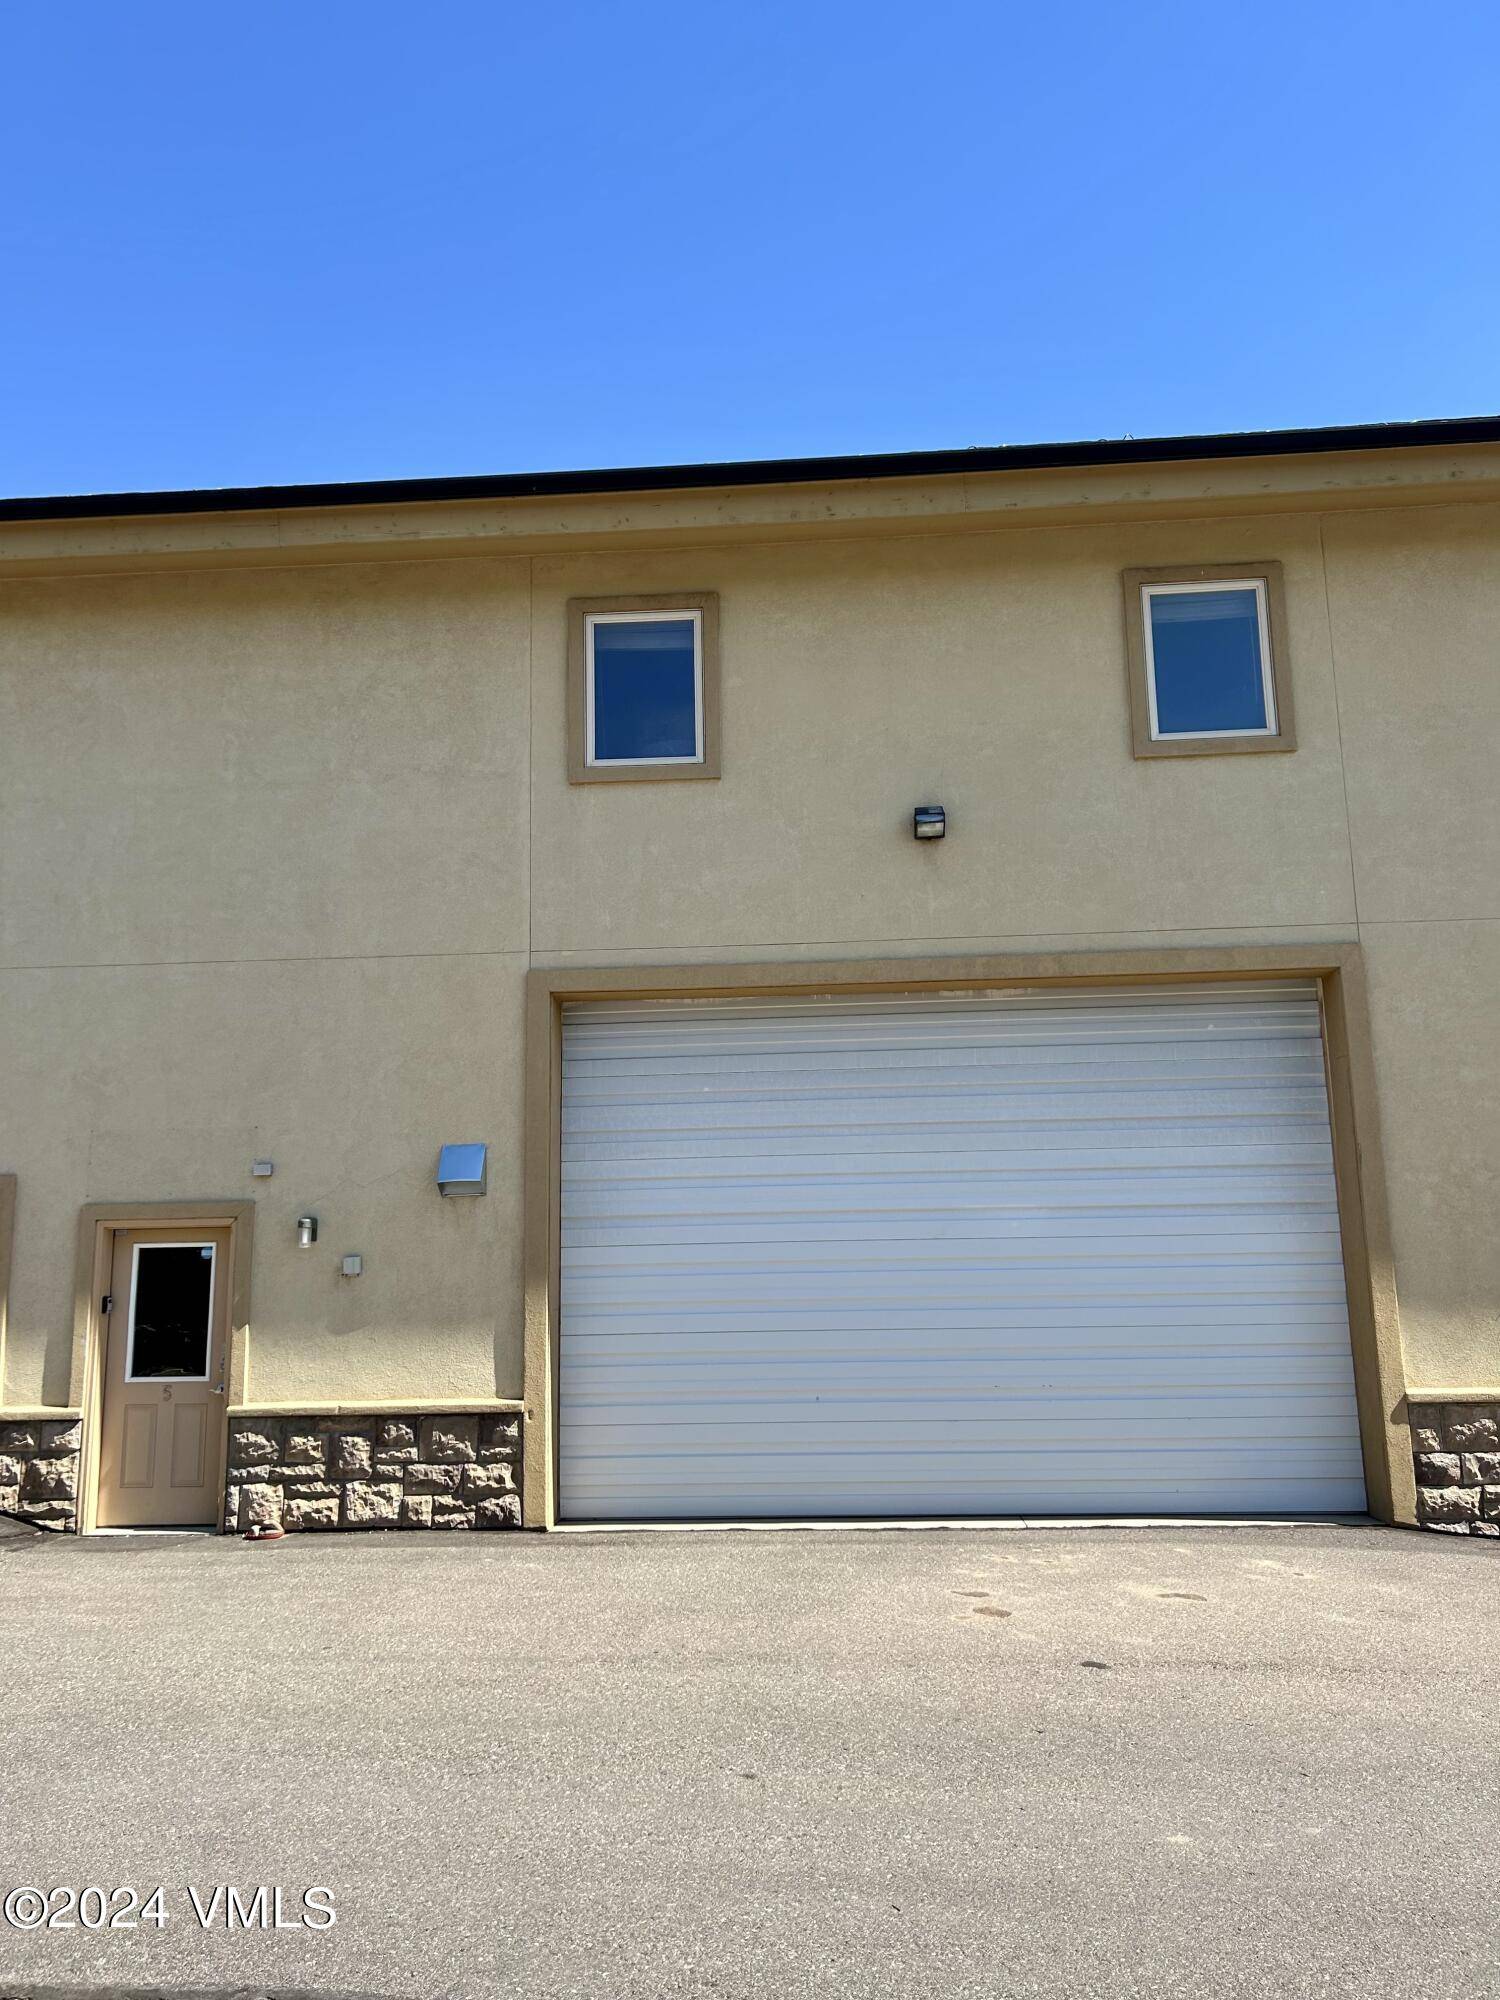 Light industrial zoned condominium warehouse unit in an attractive stucco building at the Eagle County Vail Airport.